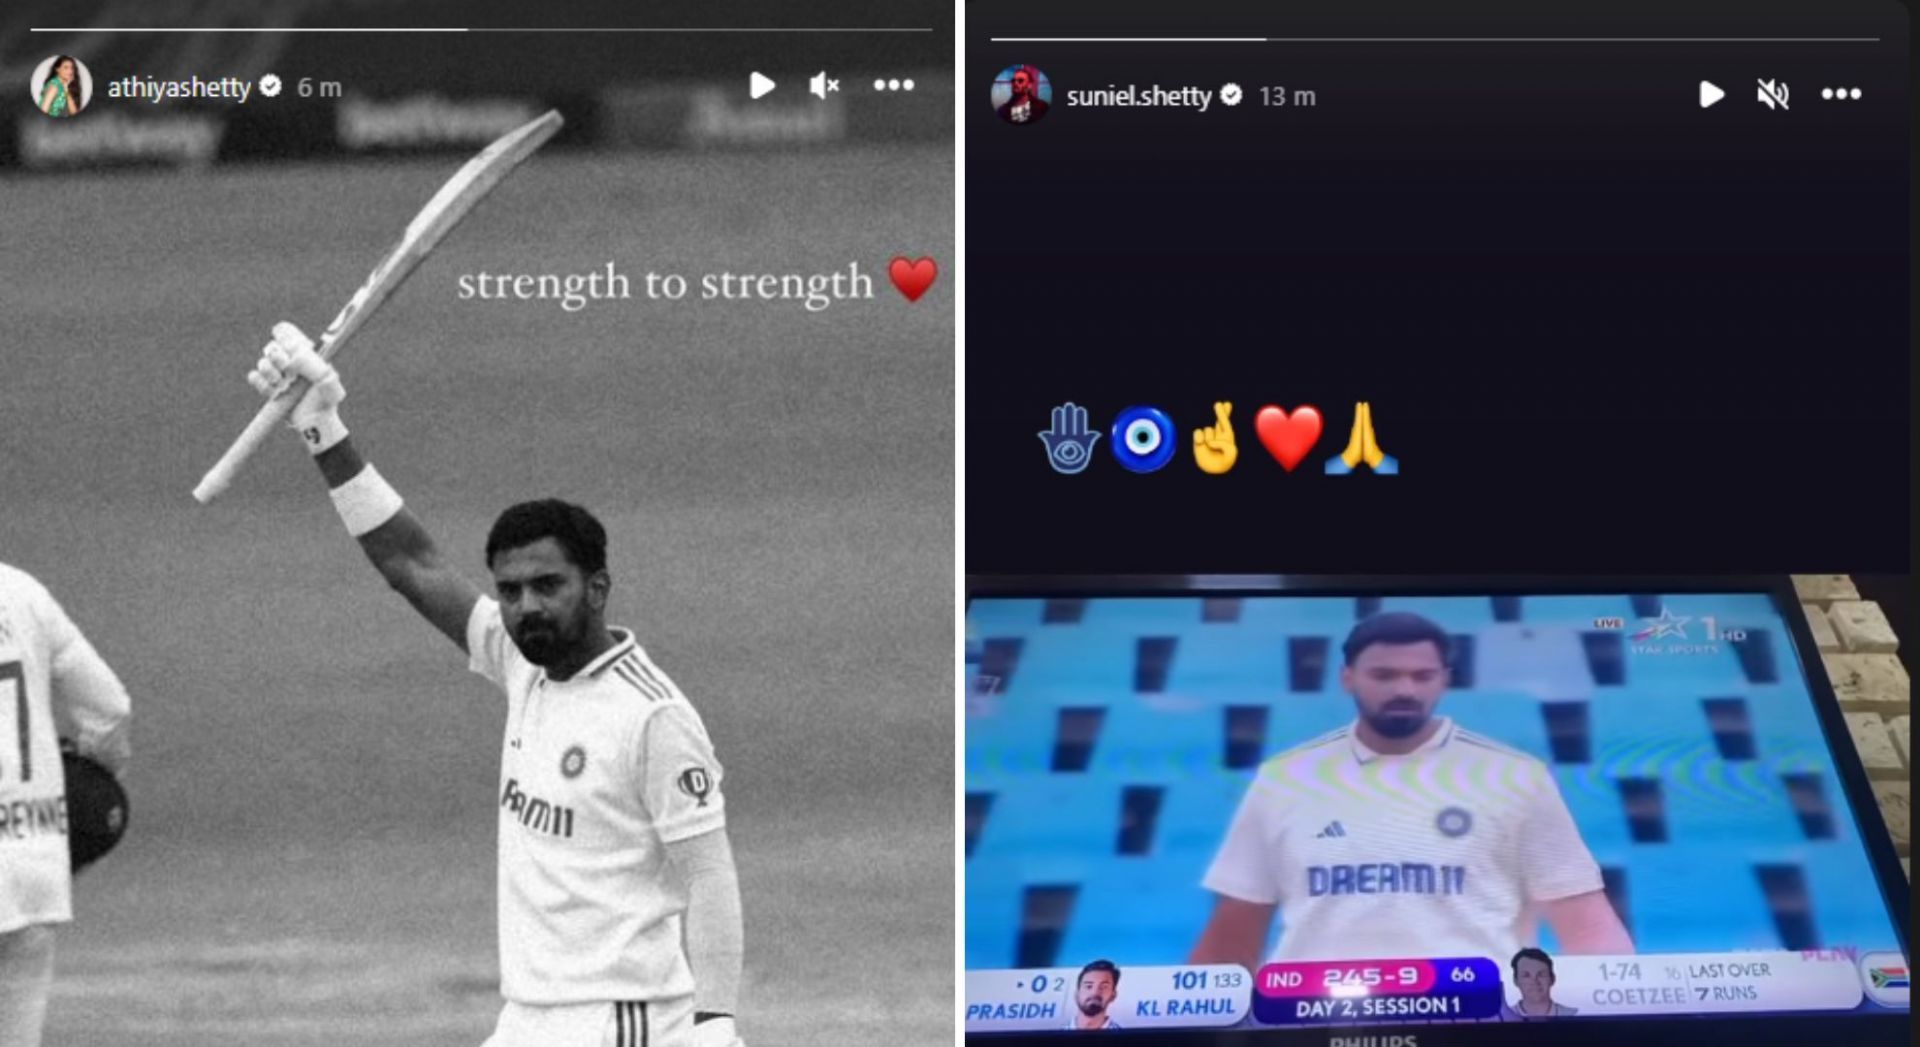 KL Rahul&#039;s wife Athiya and father-in-law Suniel Shetty&#039;s Instagram stories.